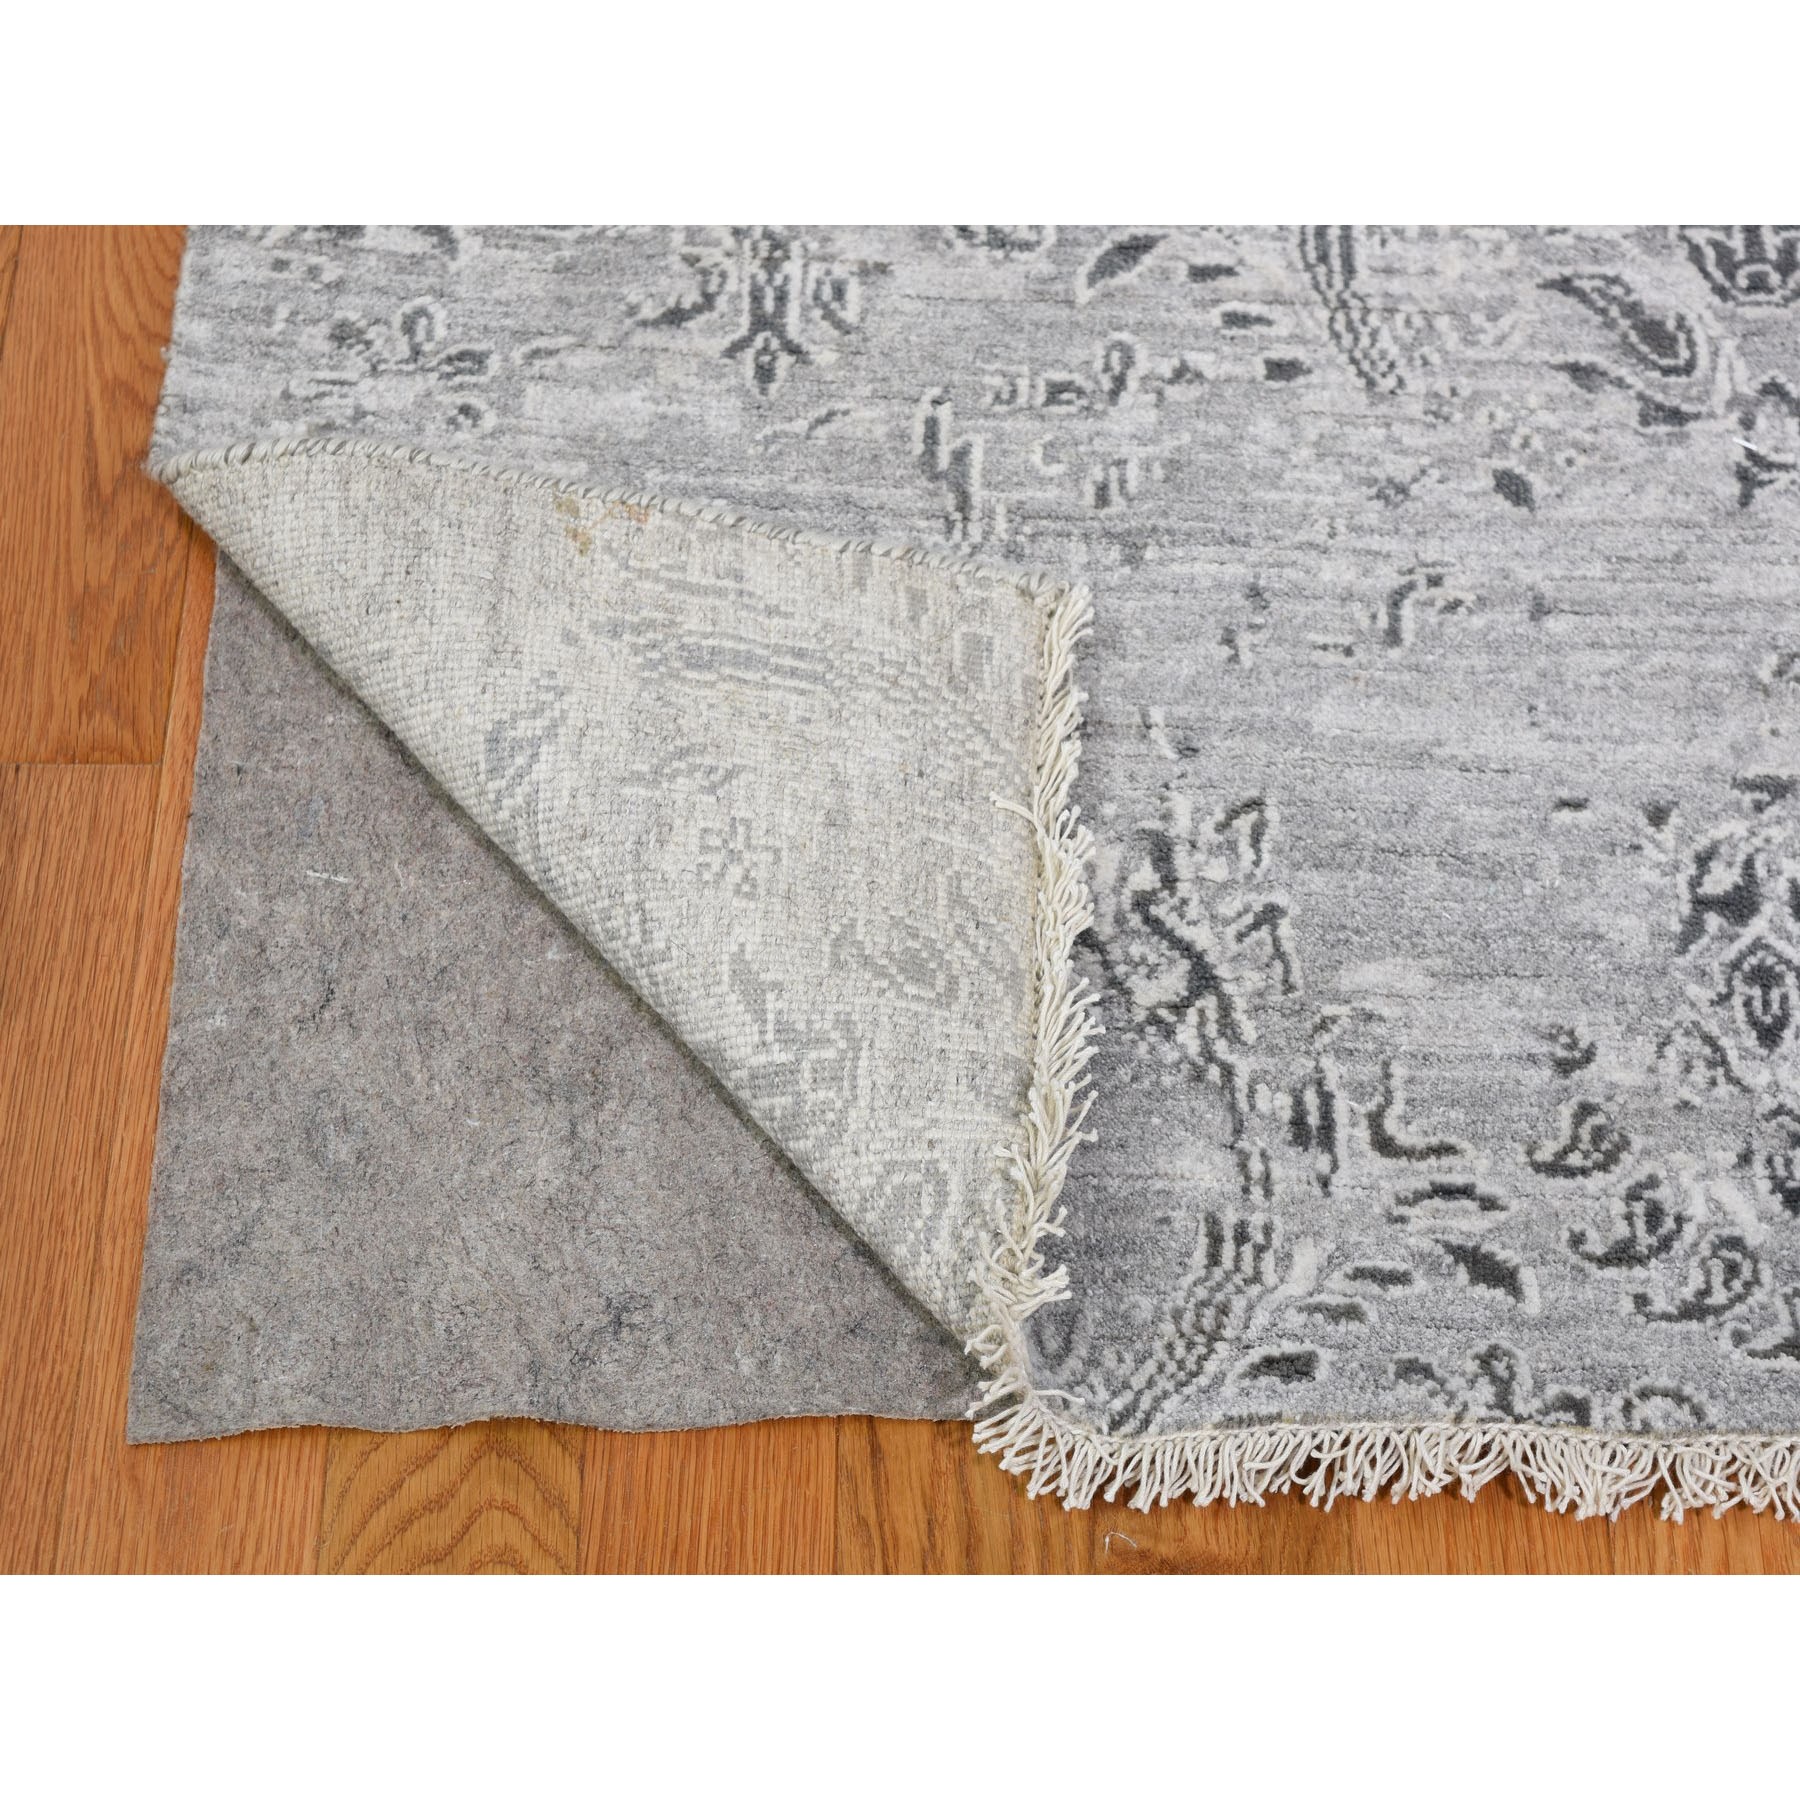 11-9 x14-10  Oversize Gray Damask Tone On Tone Wool and Silk Hand-Knotted Oriental Rug 